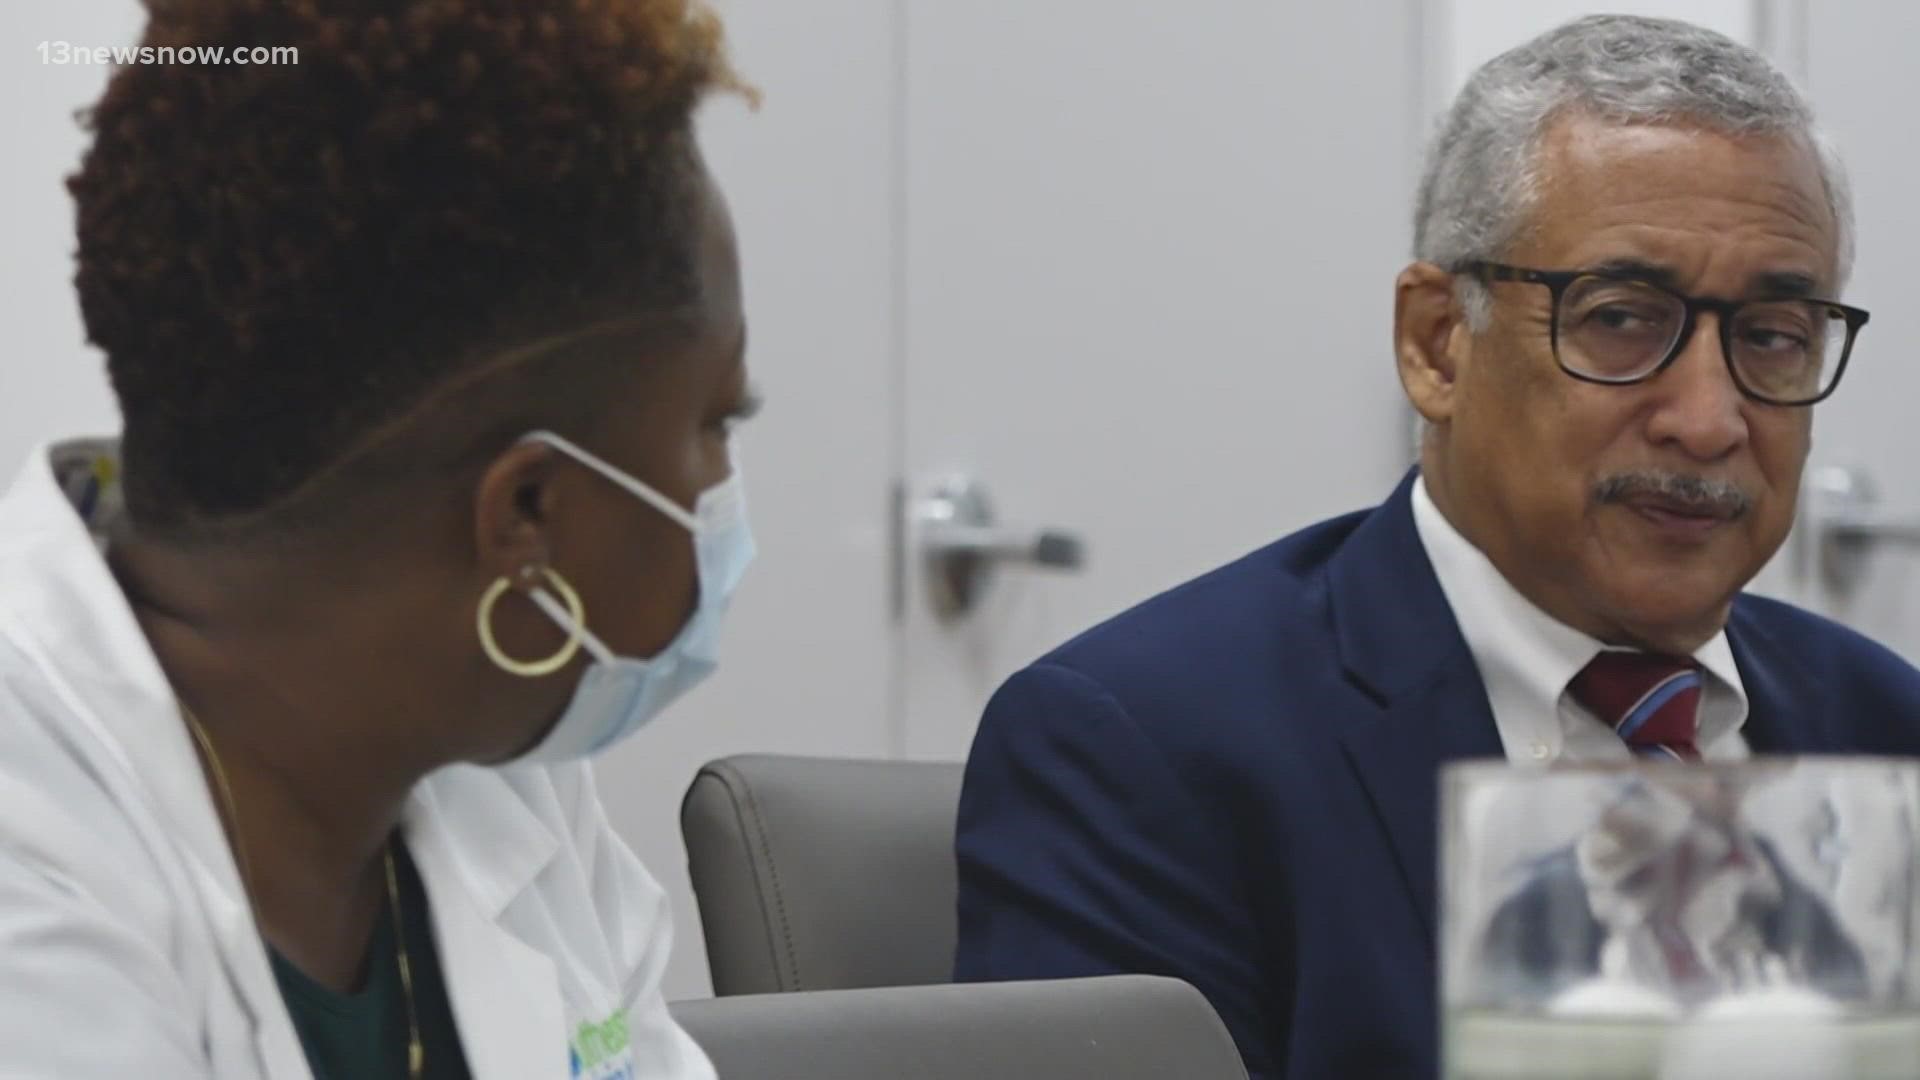 Congressman Bobby Scott met with health providers on reproductive health after the US Supreme Court overturned Roe v. Wade.